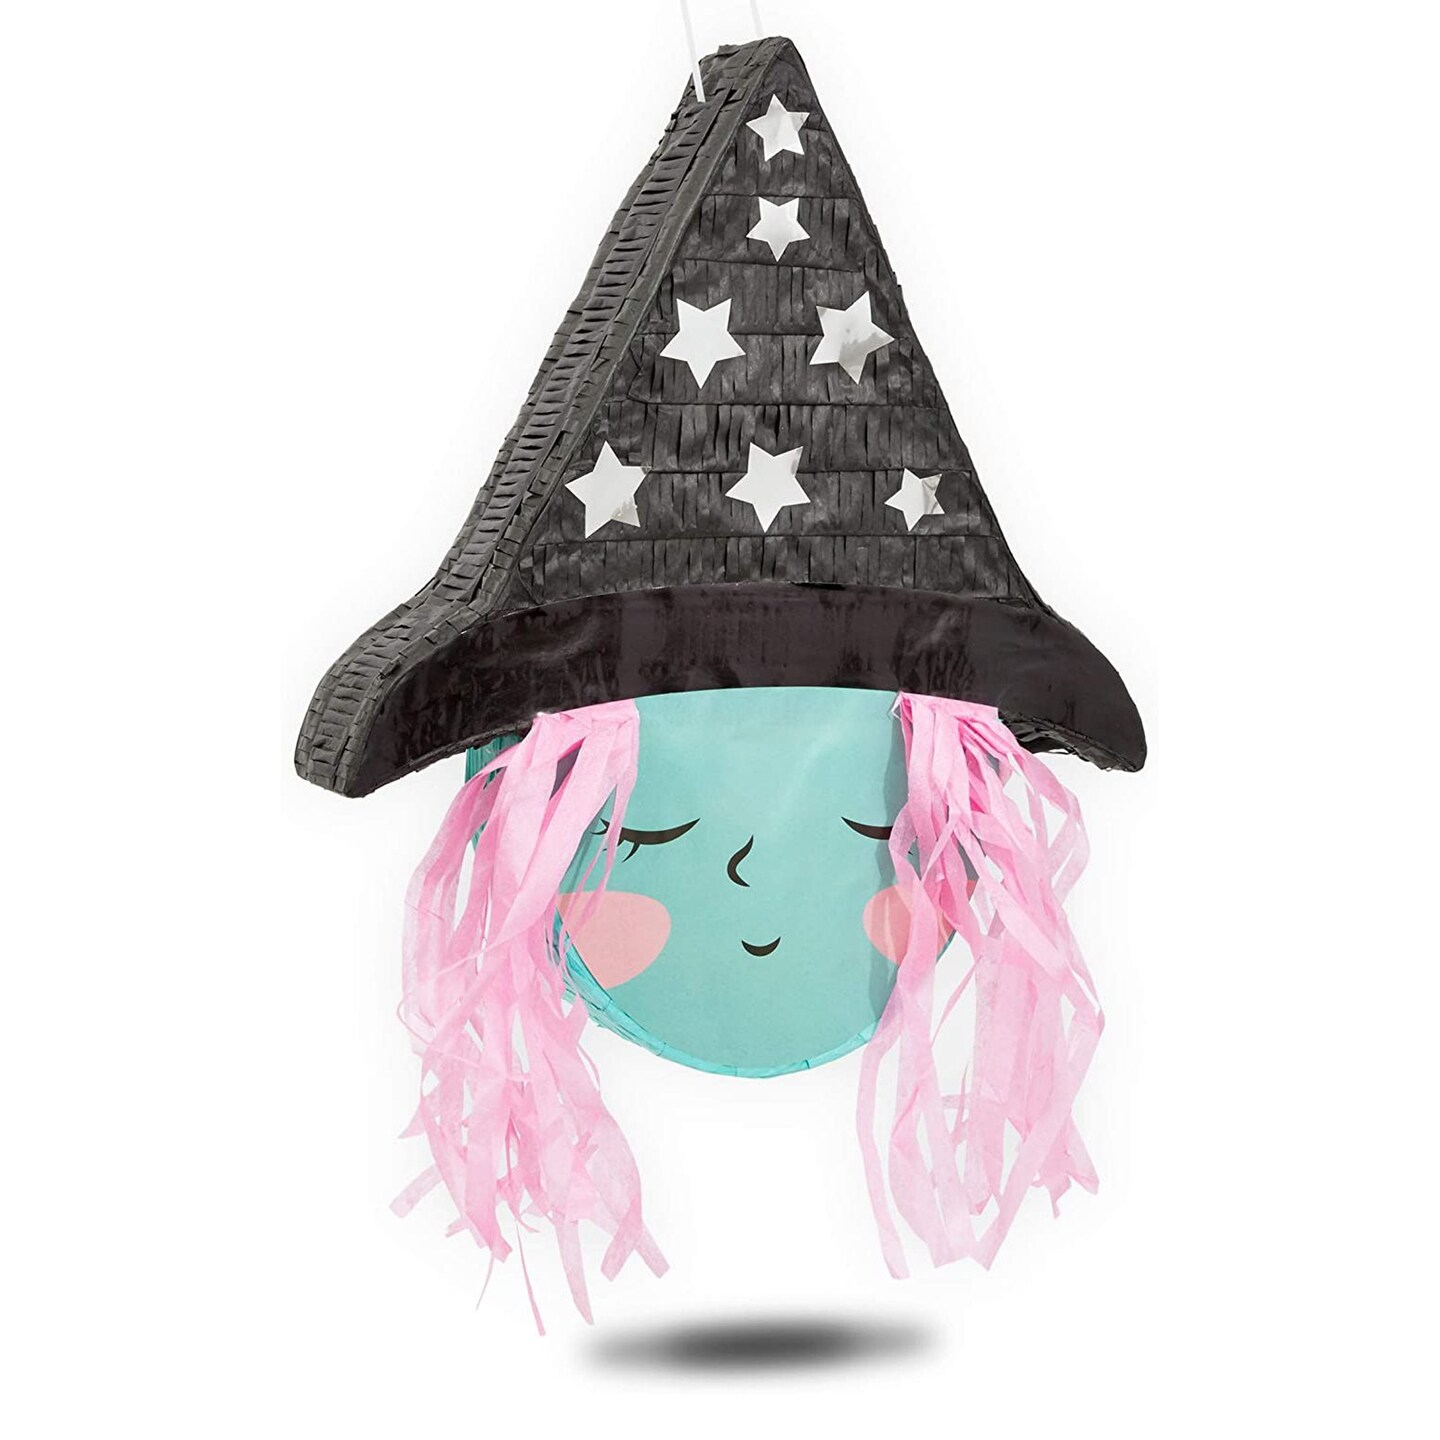 Cute Witch Pinata for Halloween Party Supplies Decorations, Silver Foil Stars Hat with Pink Hair, 16 x 13 x 3 in